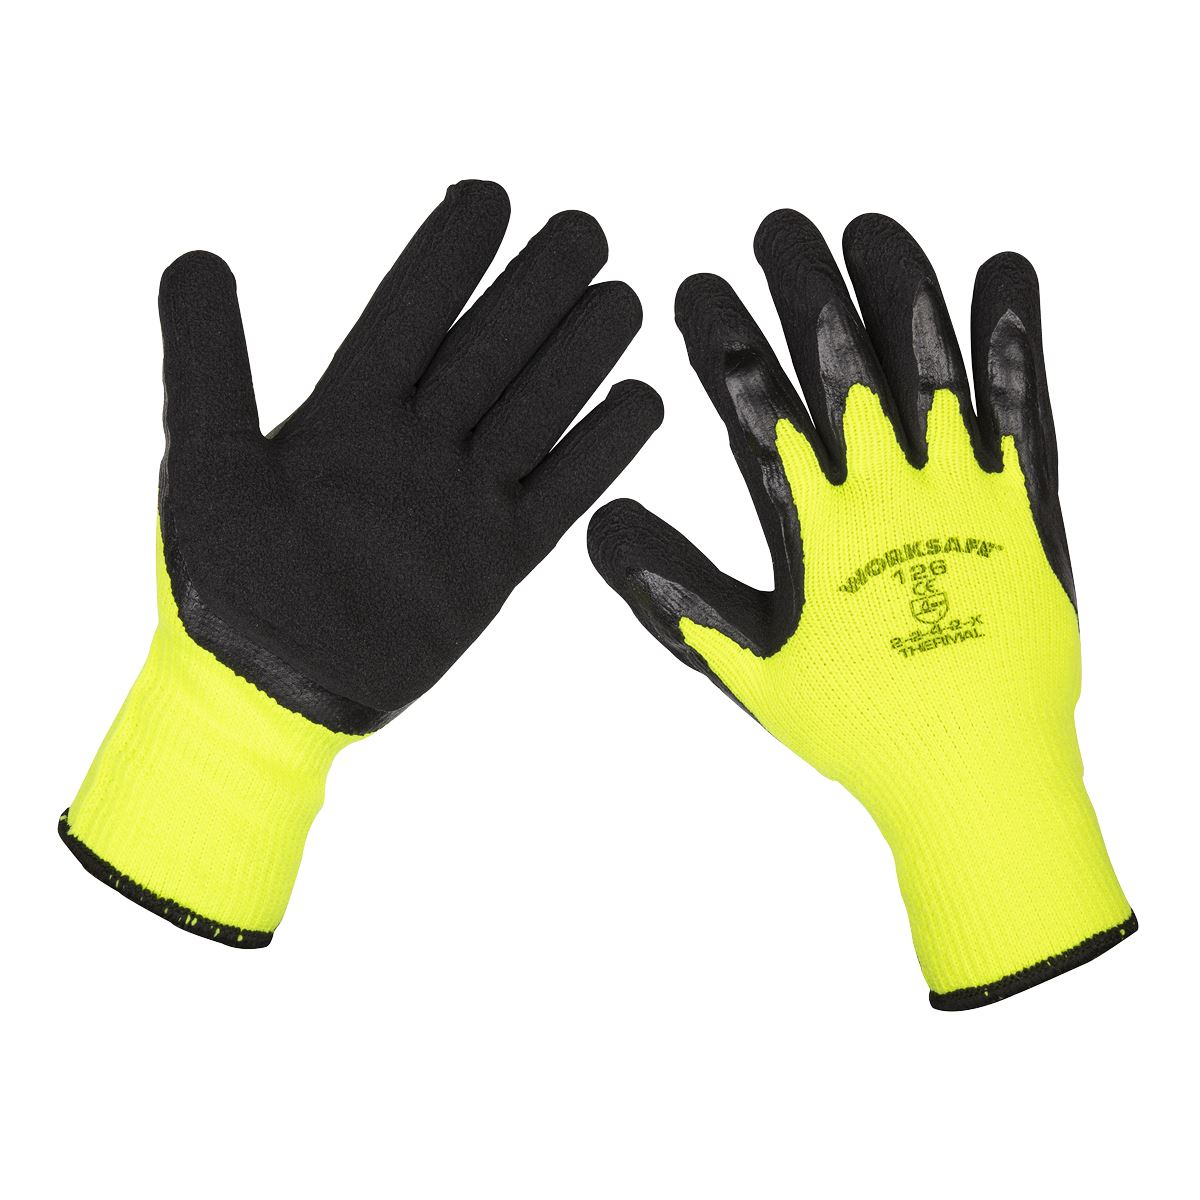 Worksafe by Sealey Thermal Super Grip Gloves (Large) - Pack of 12 Pairs